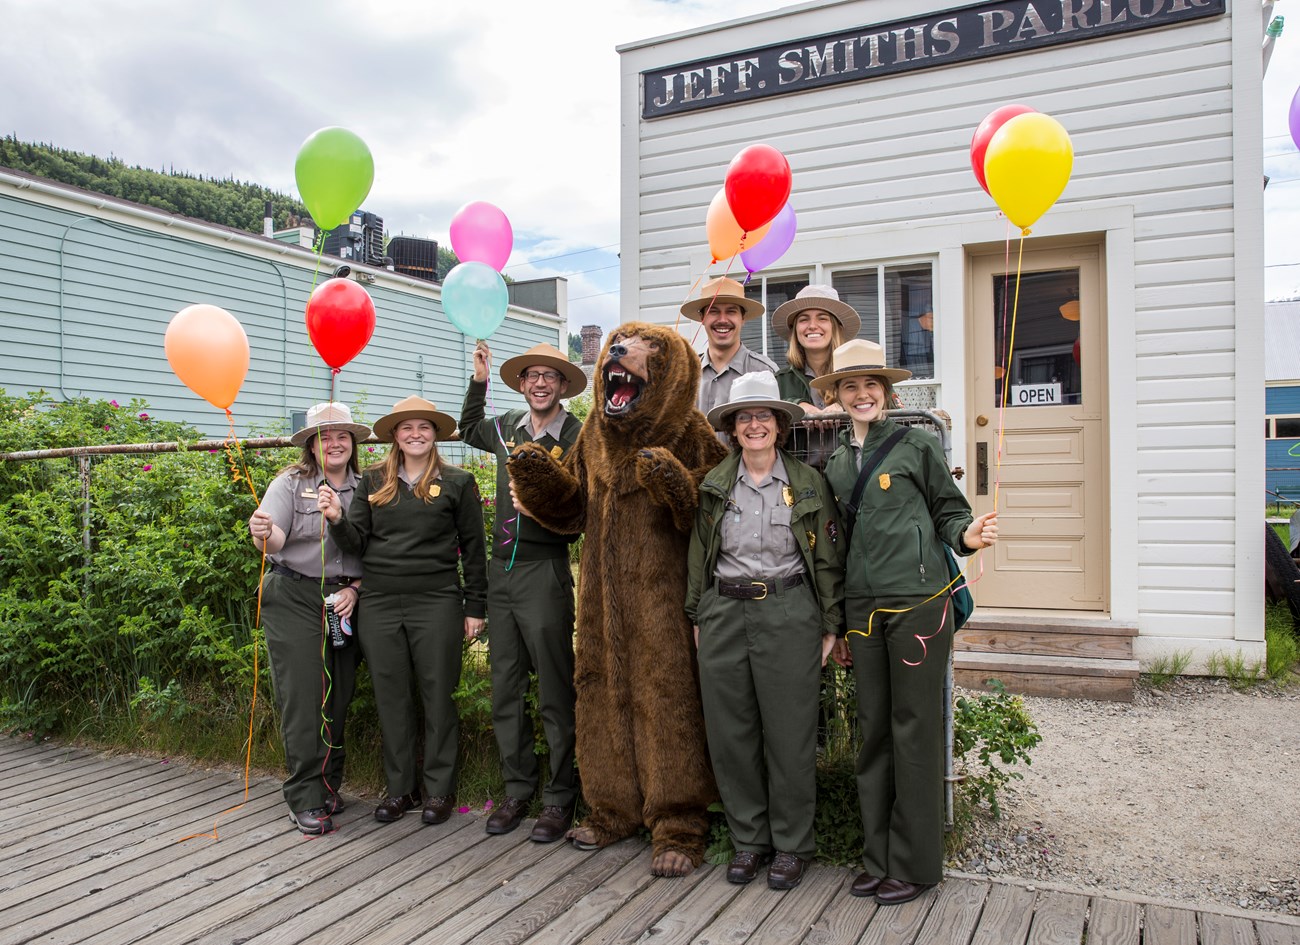 A group of rangers with balloons and a bear costume pose in front of the Jeff. Smiths Parlor.